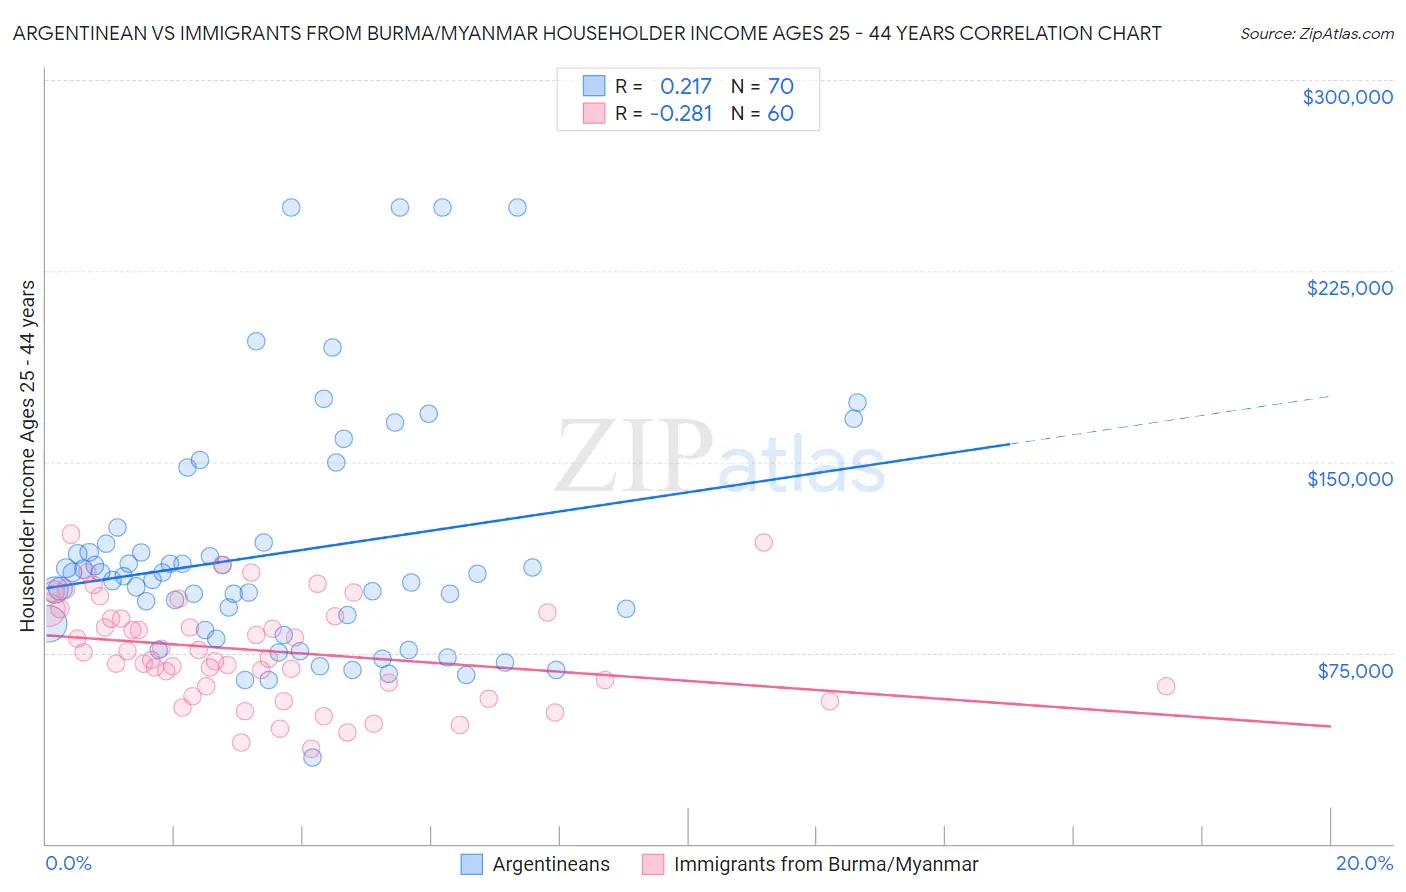 Argentinean vs Immigrants from Burma/Myanmar Householder Income Ages 25 - 44 years